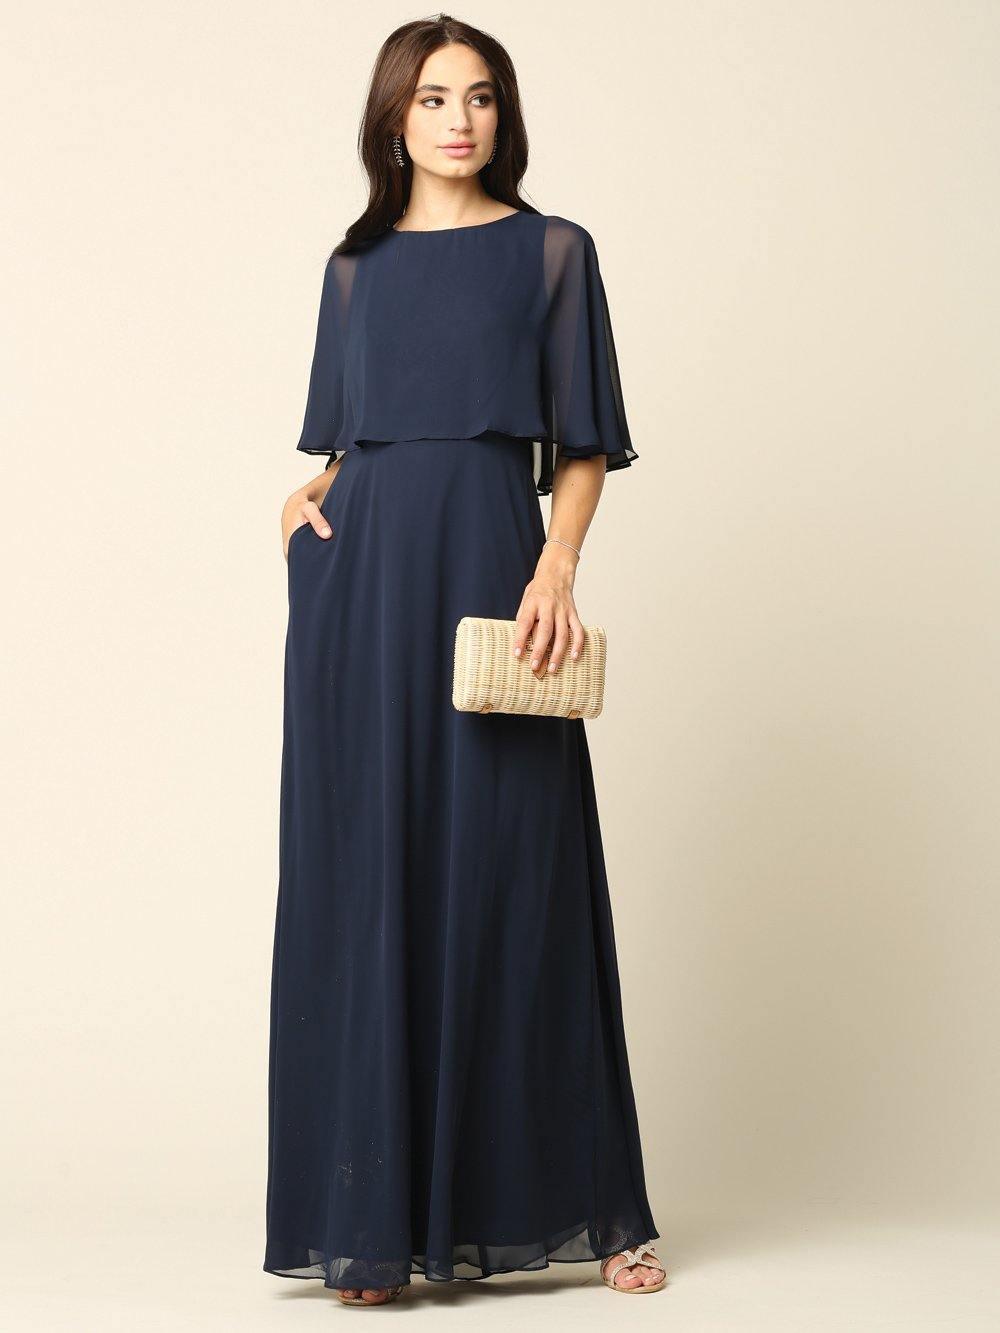 Long Formal Mother of the Bride Cape Chiffon Dress - The Dress Outlet Eva Fashion